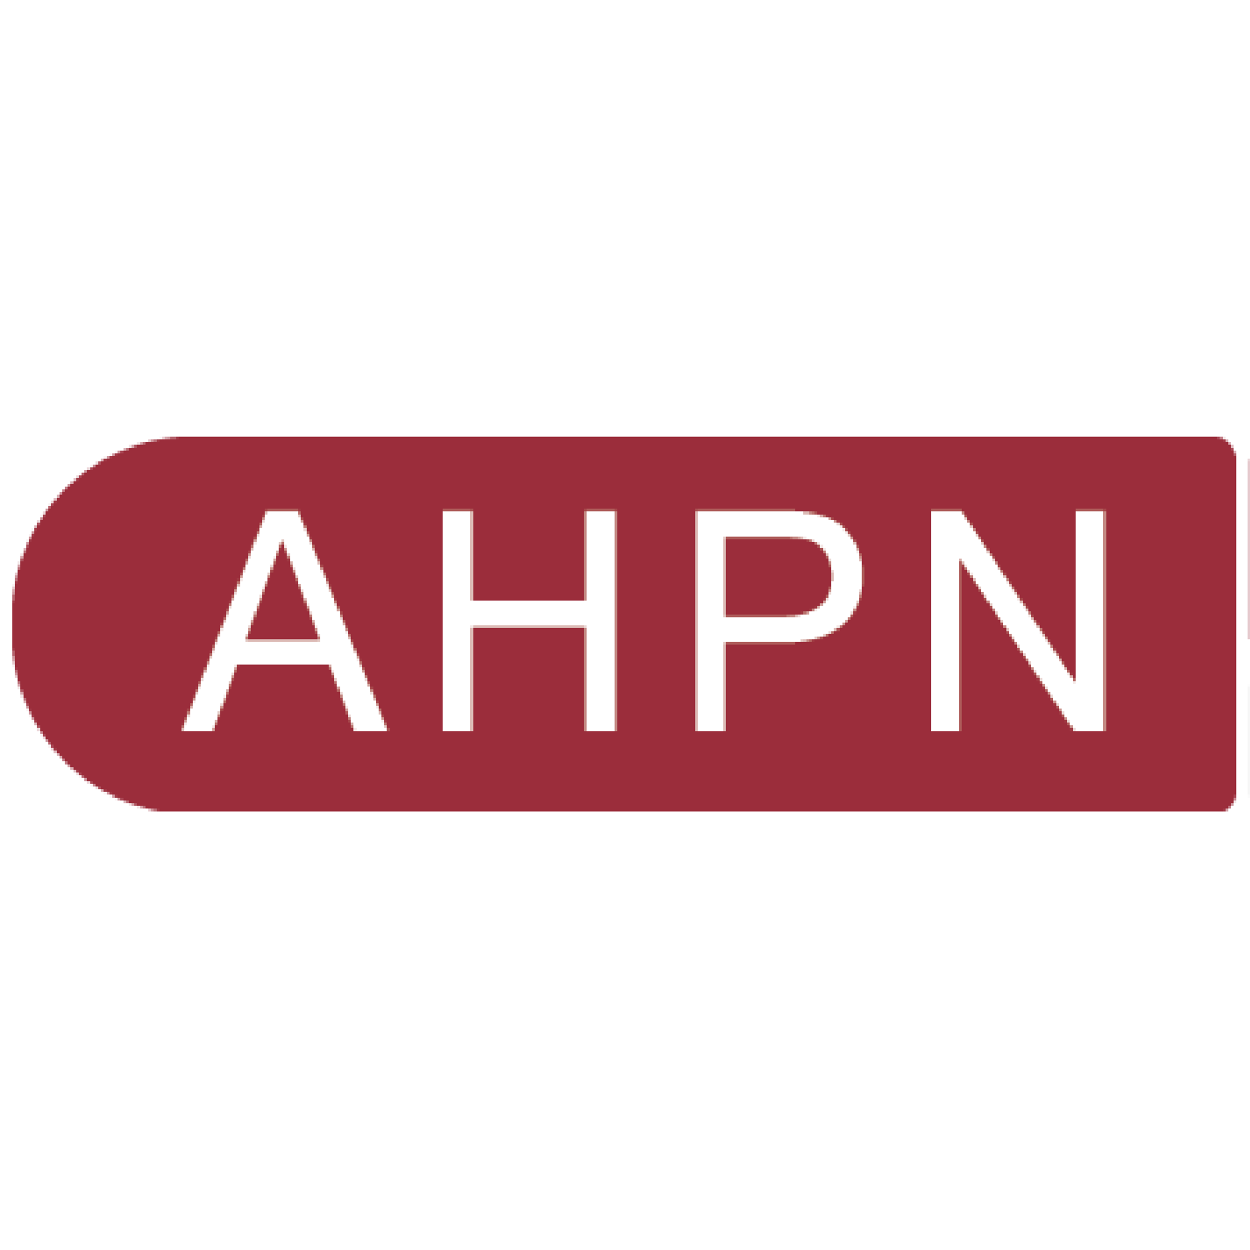 Charity in New Cross and London AHPN charity logo